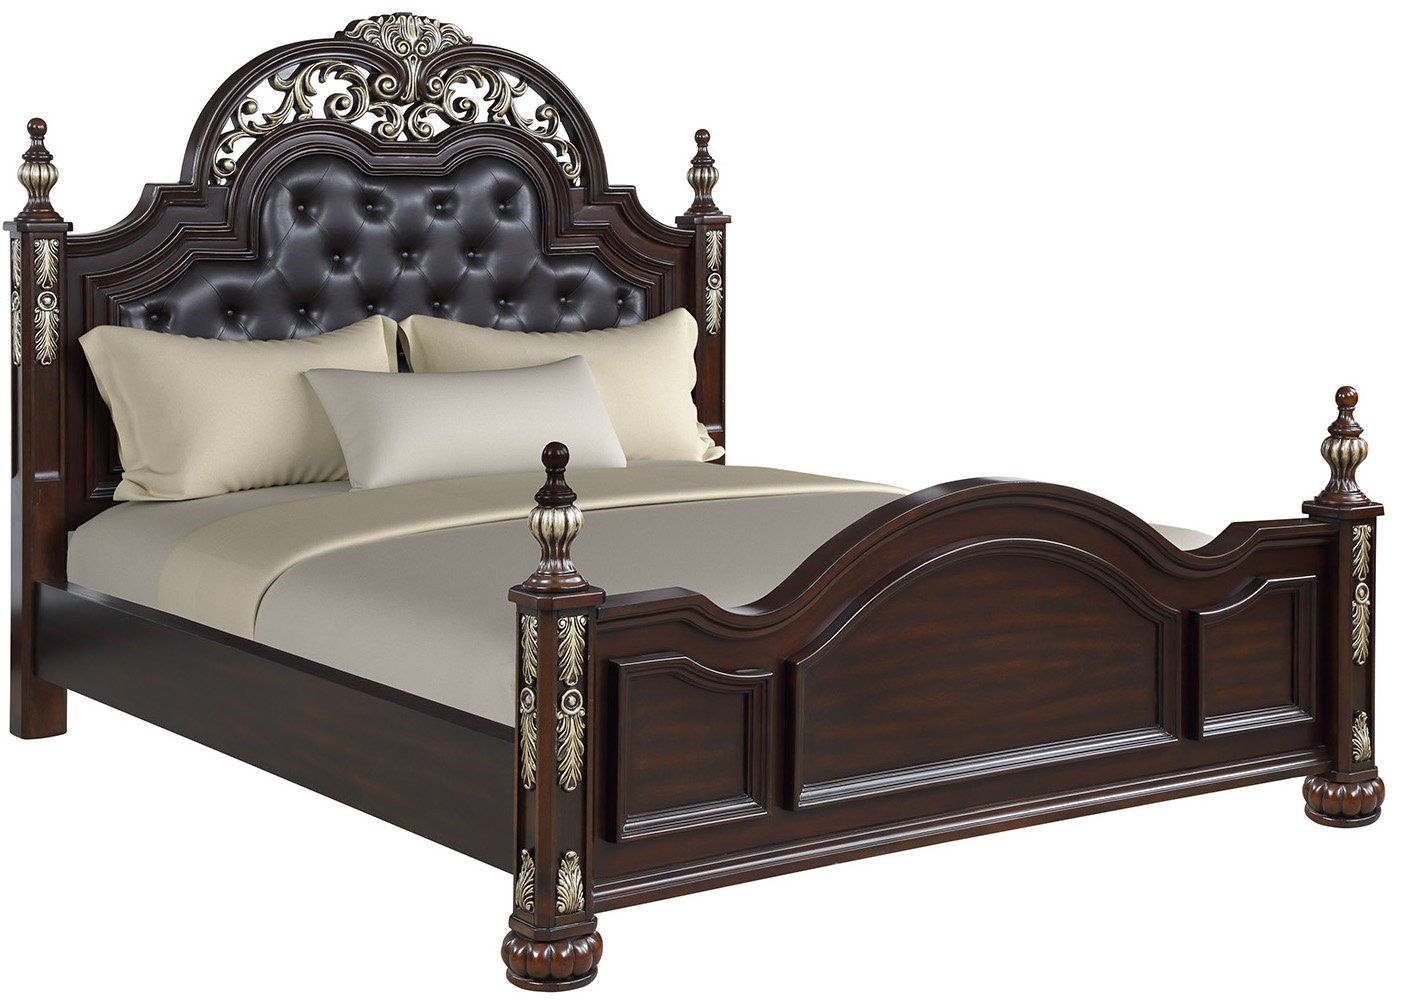 Maximus King Bed